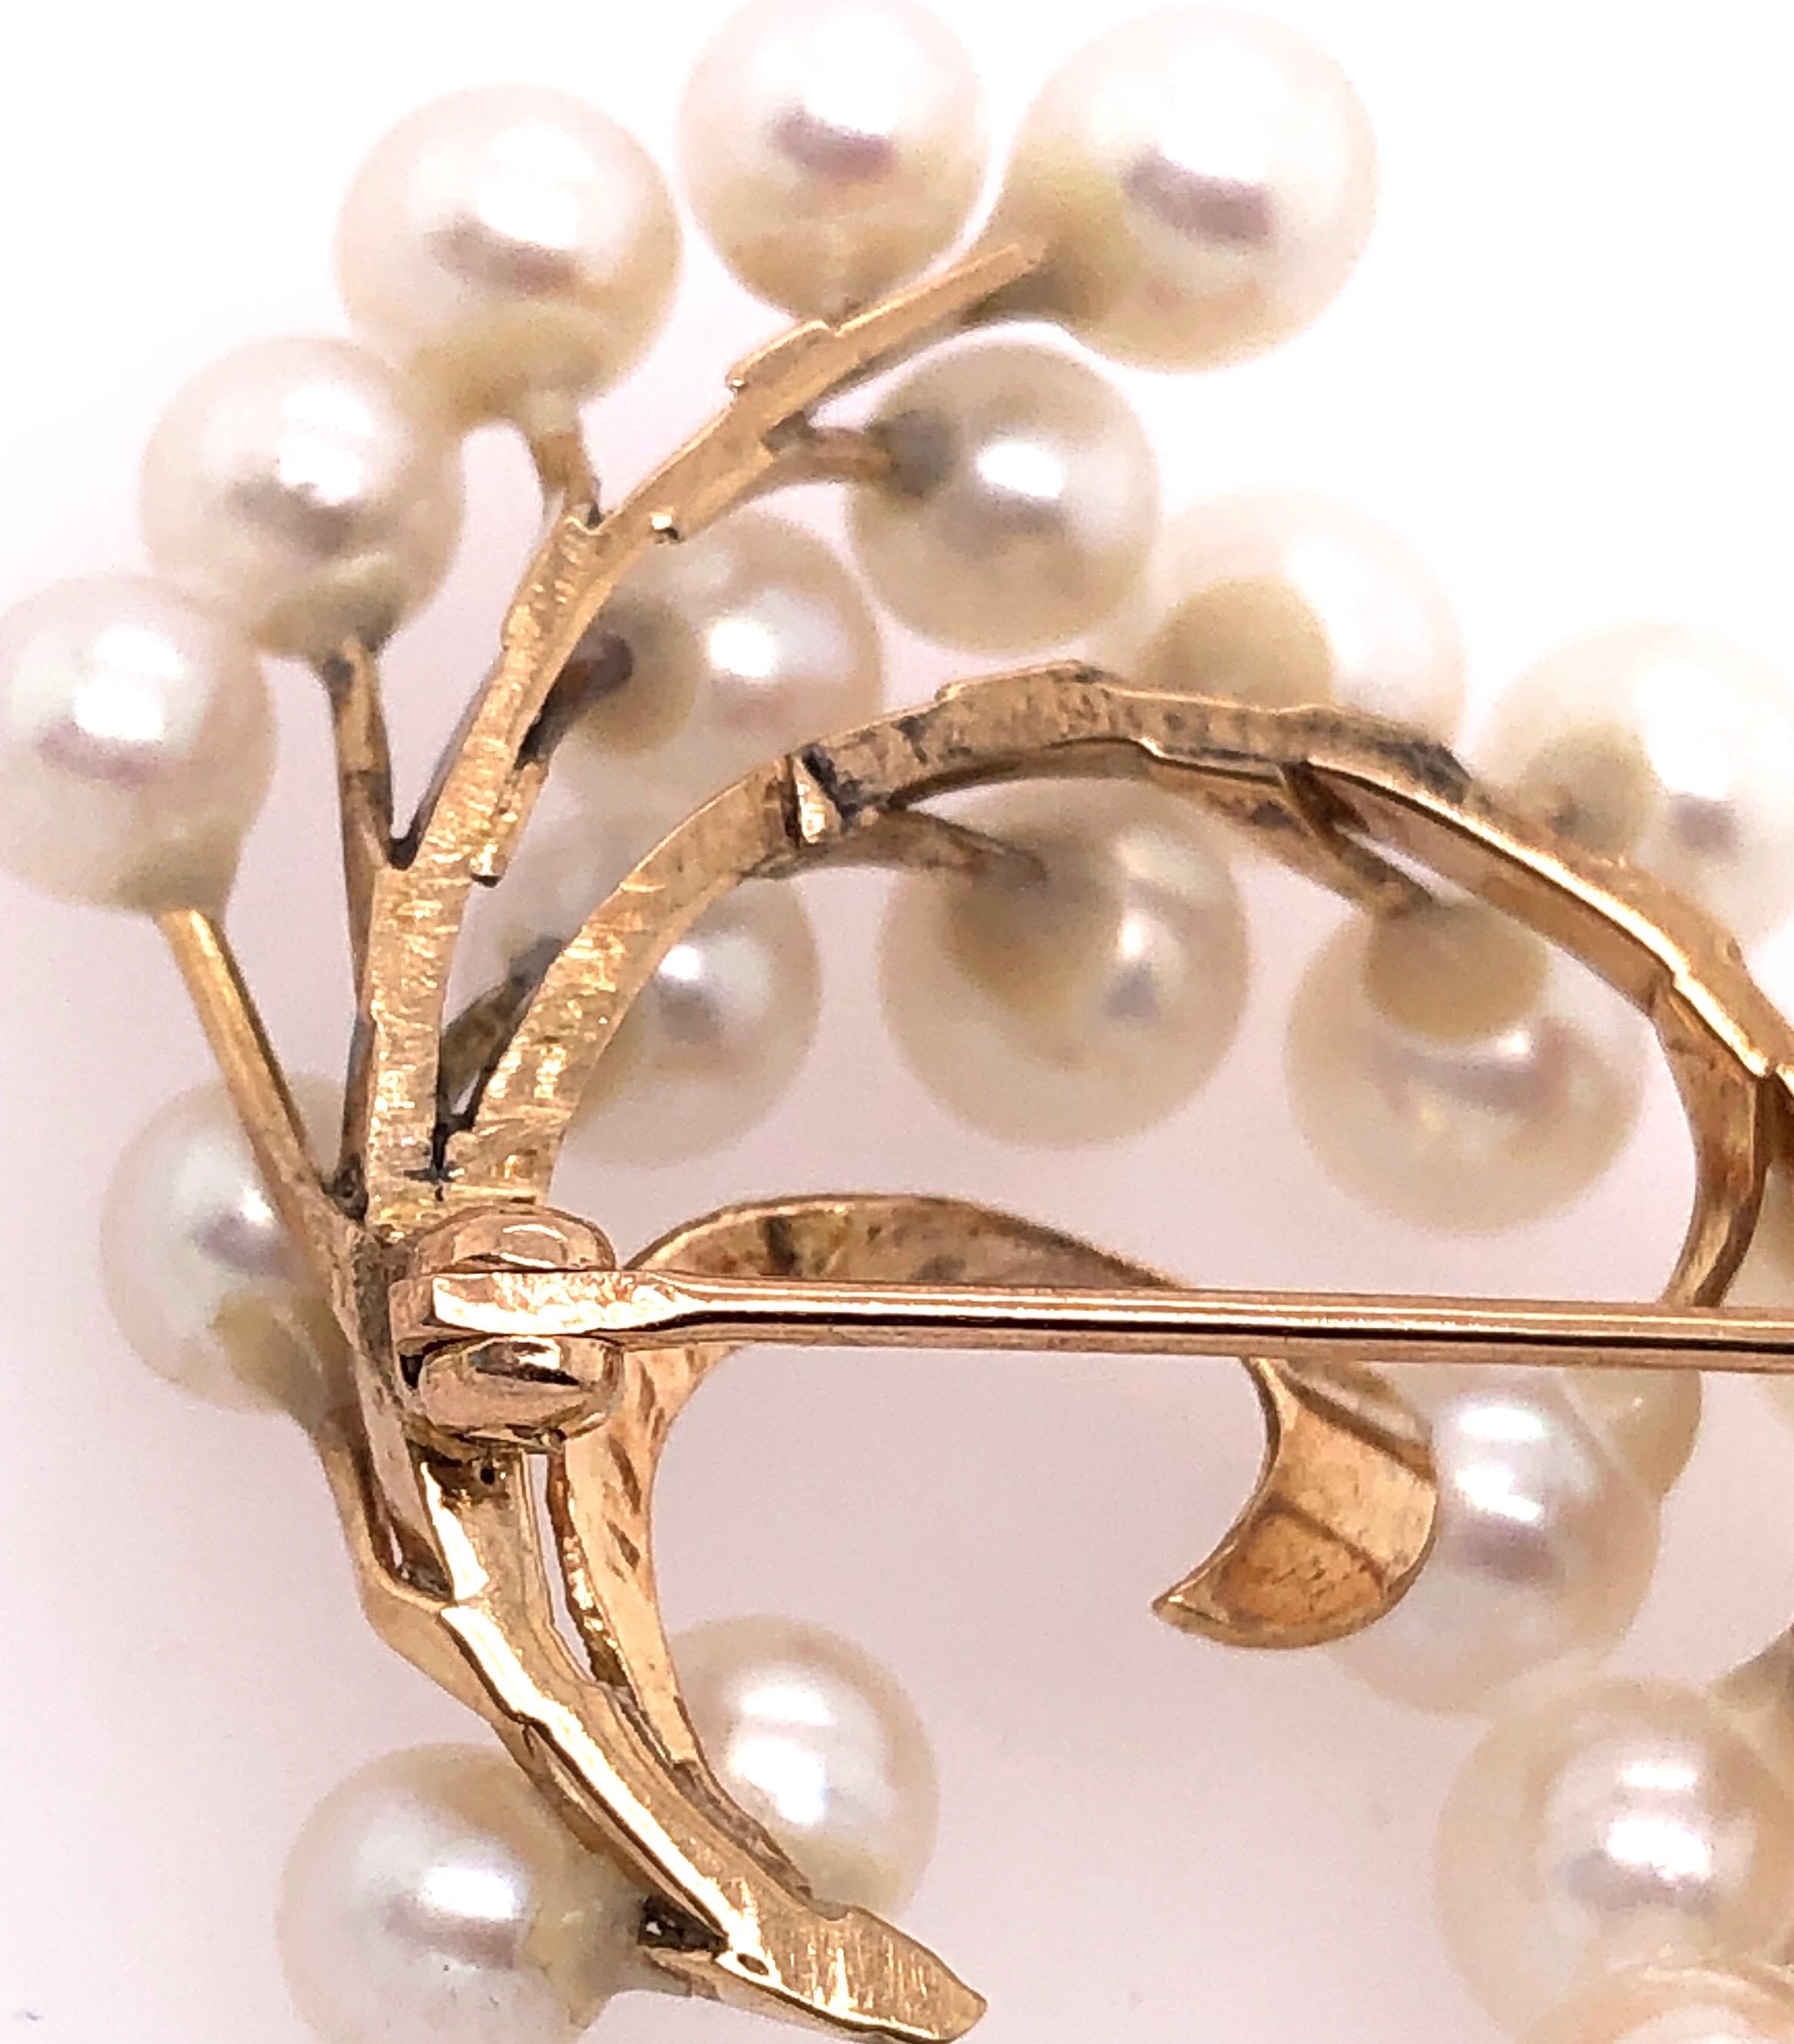 14 Karat Yellow Gold Free Form Brooch With Twenty Cultured Pearls
6.28 grams total weight.